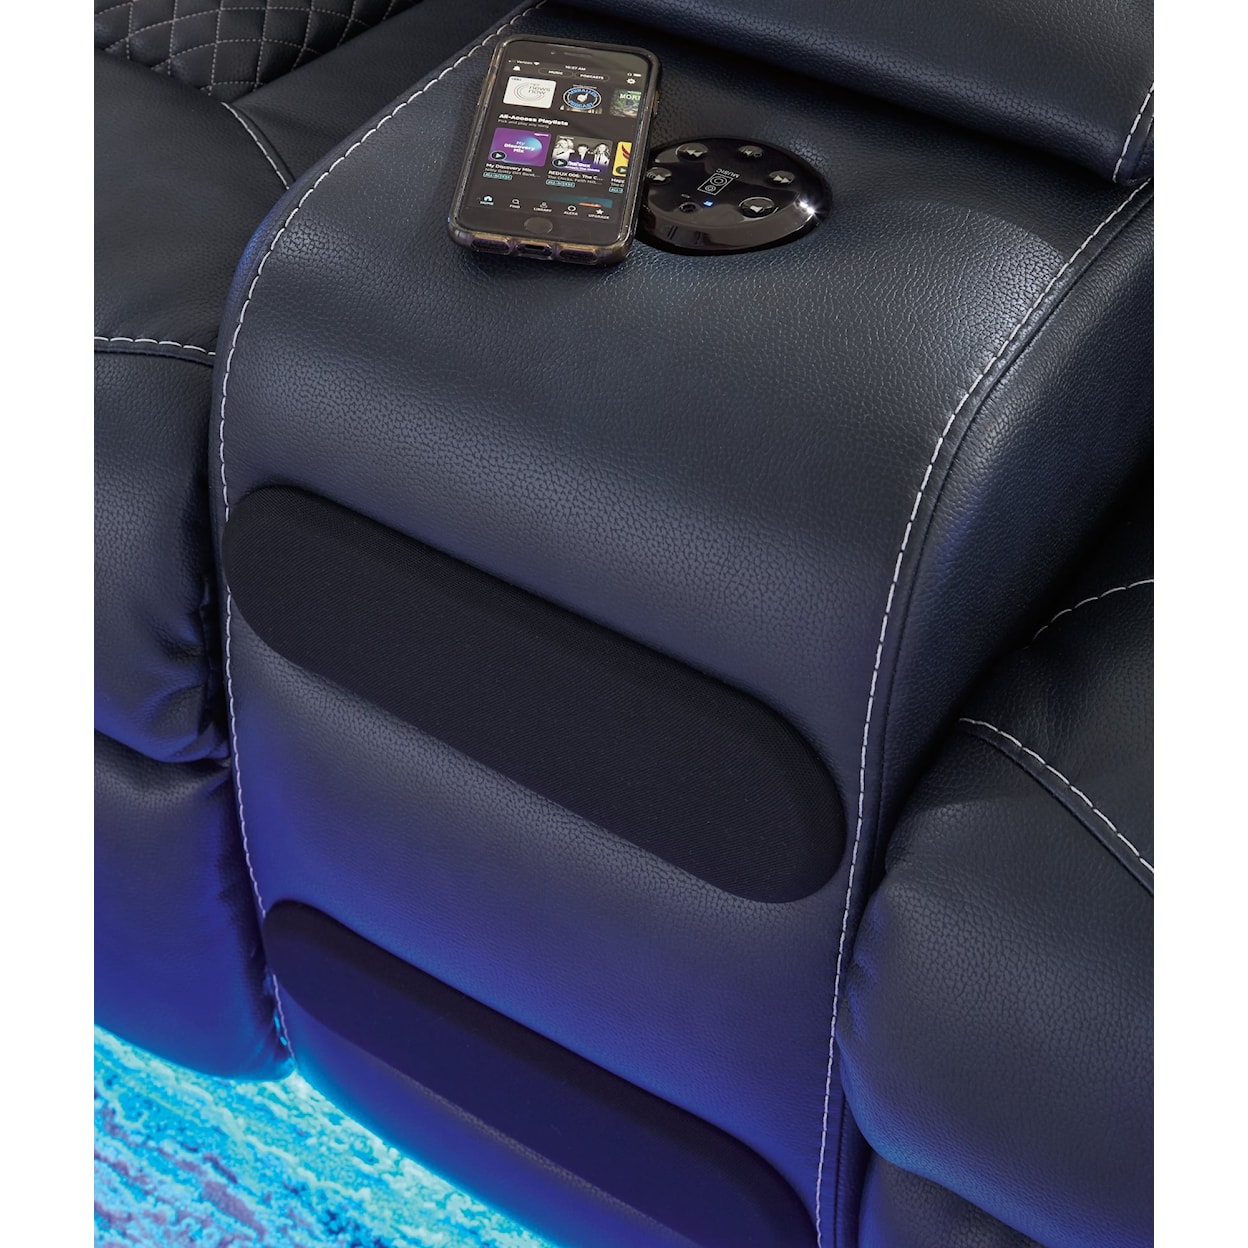 Signature Design Fyne-Dyme Power Reclining Loveseat With Console